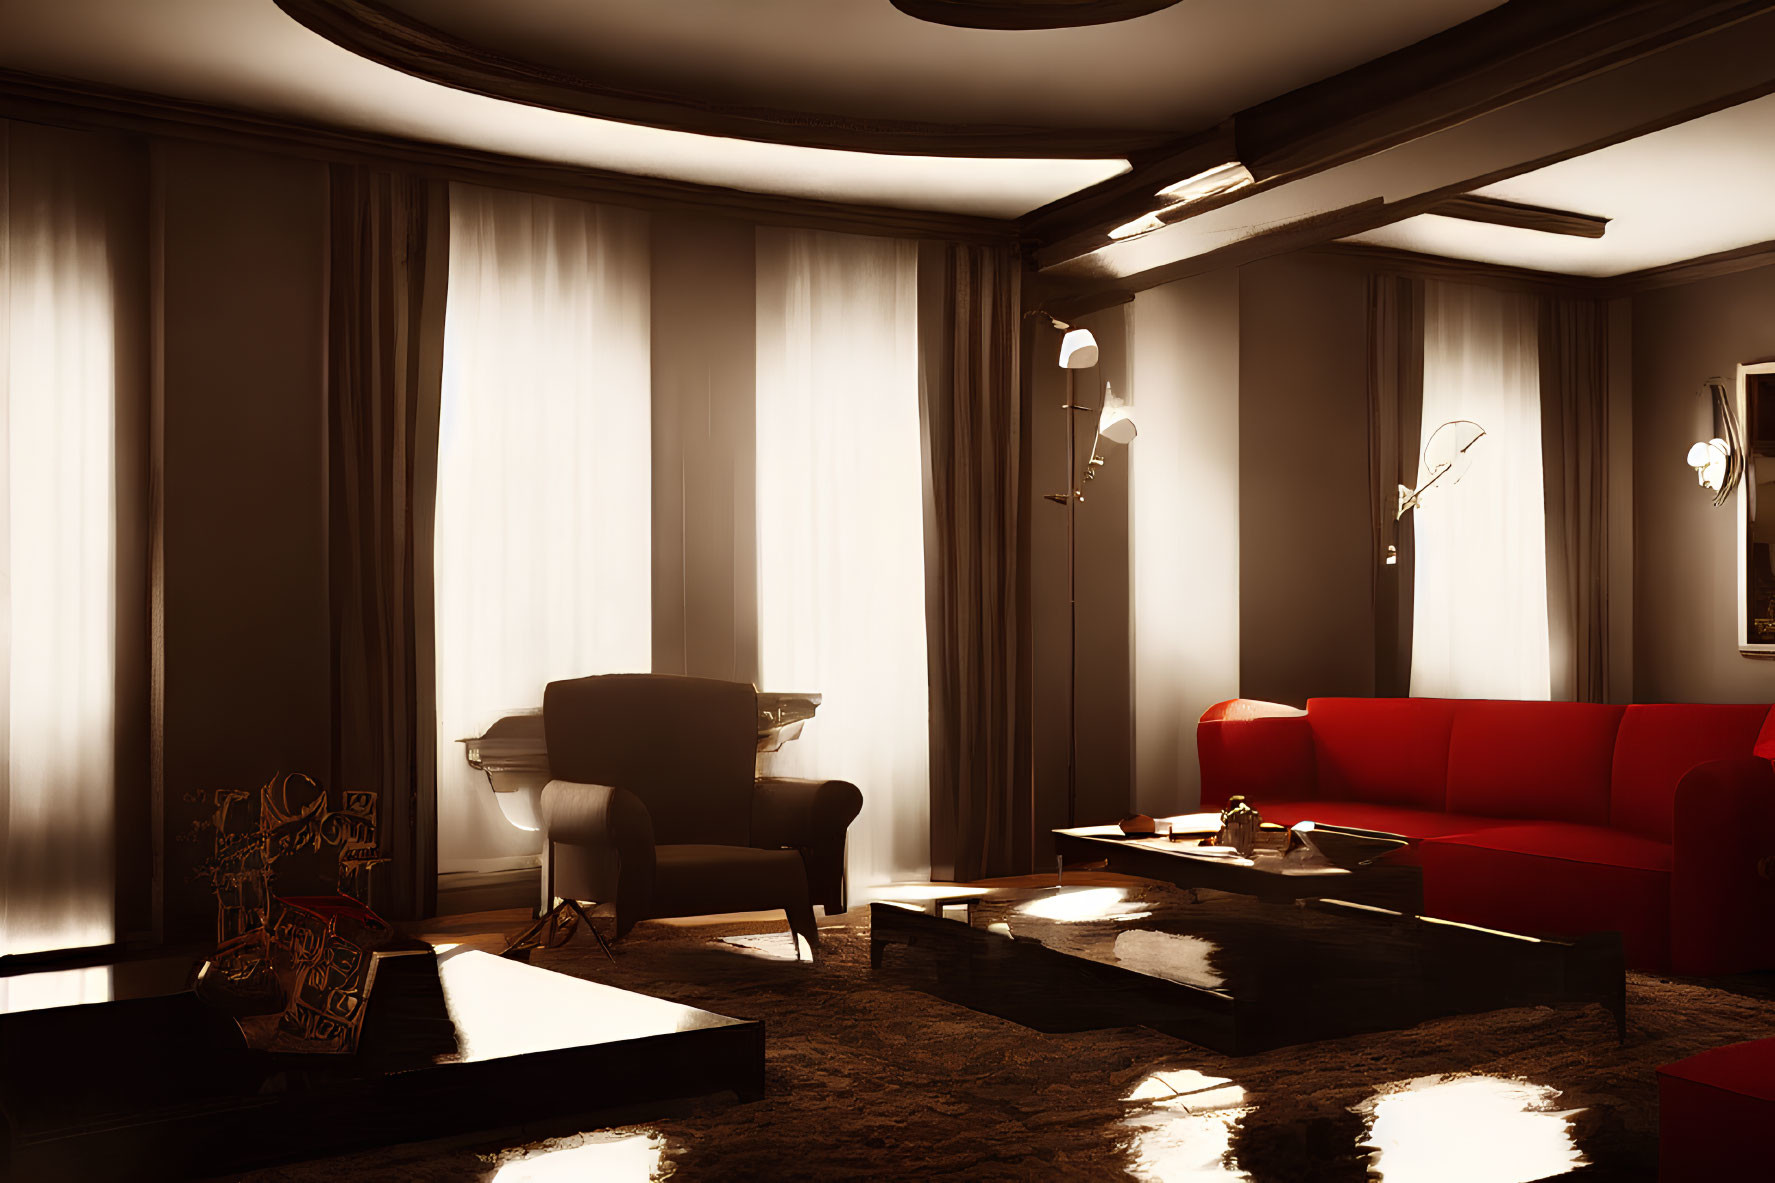 Modern living room with red sofa and glowing lights at dusk